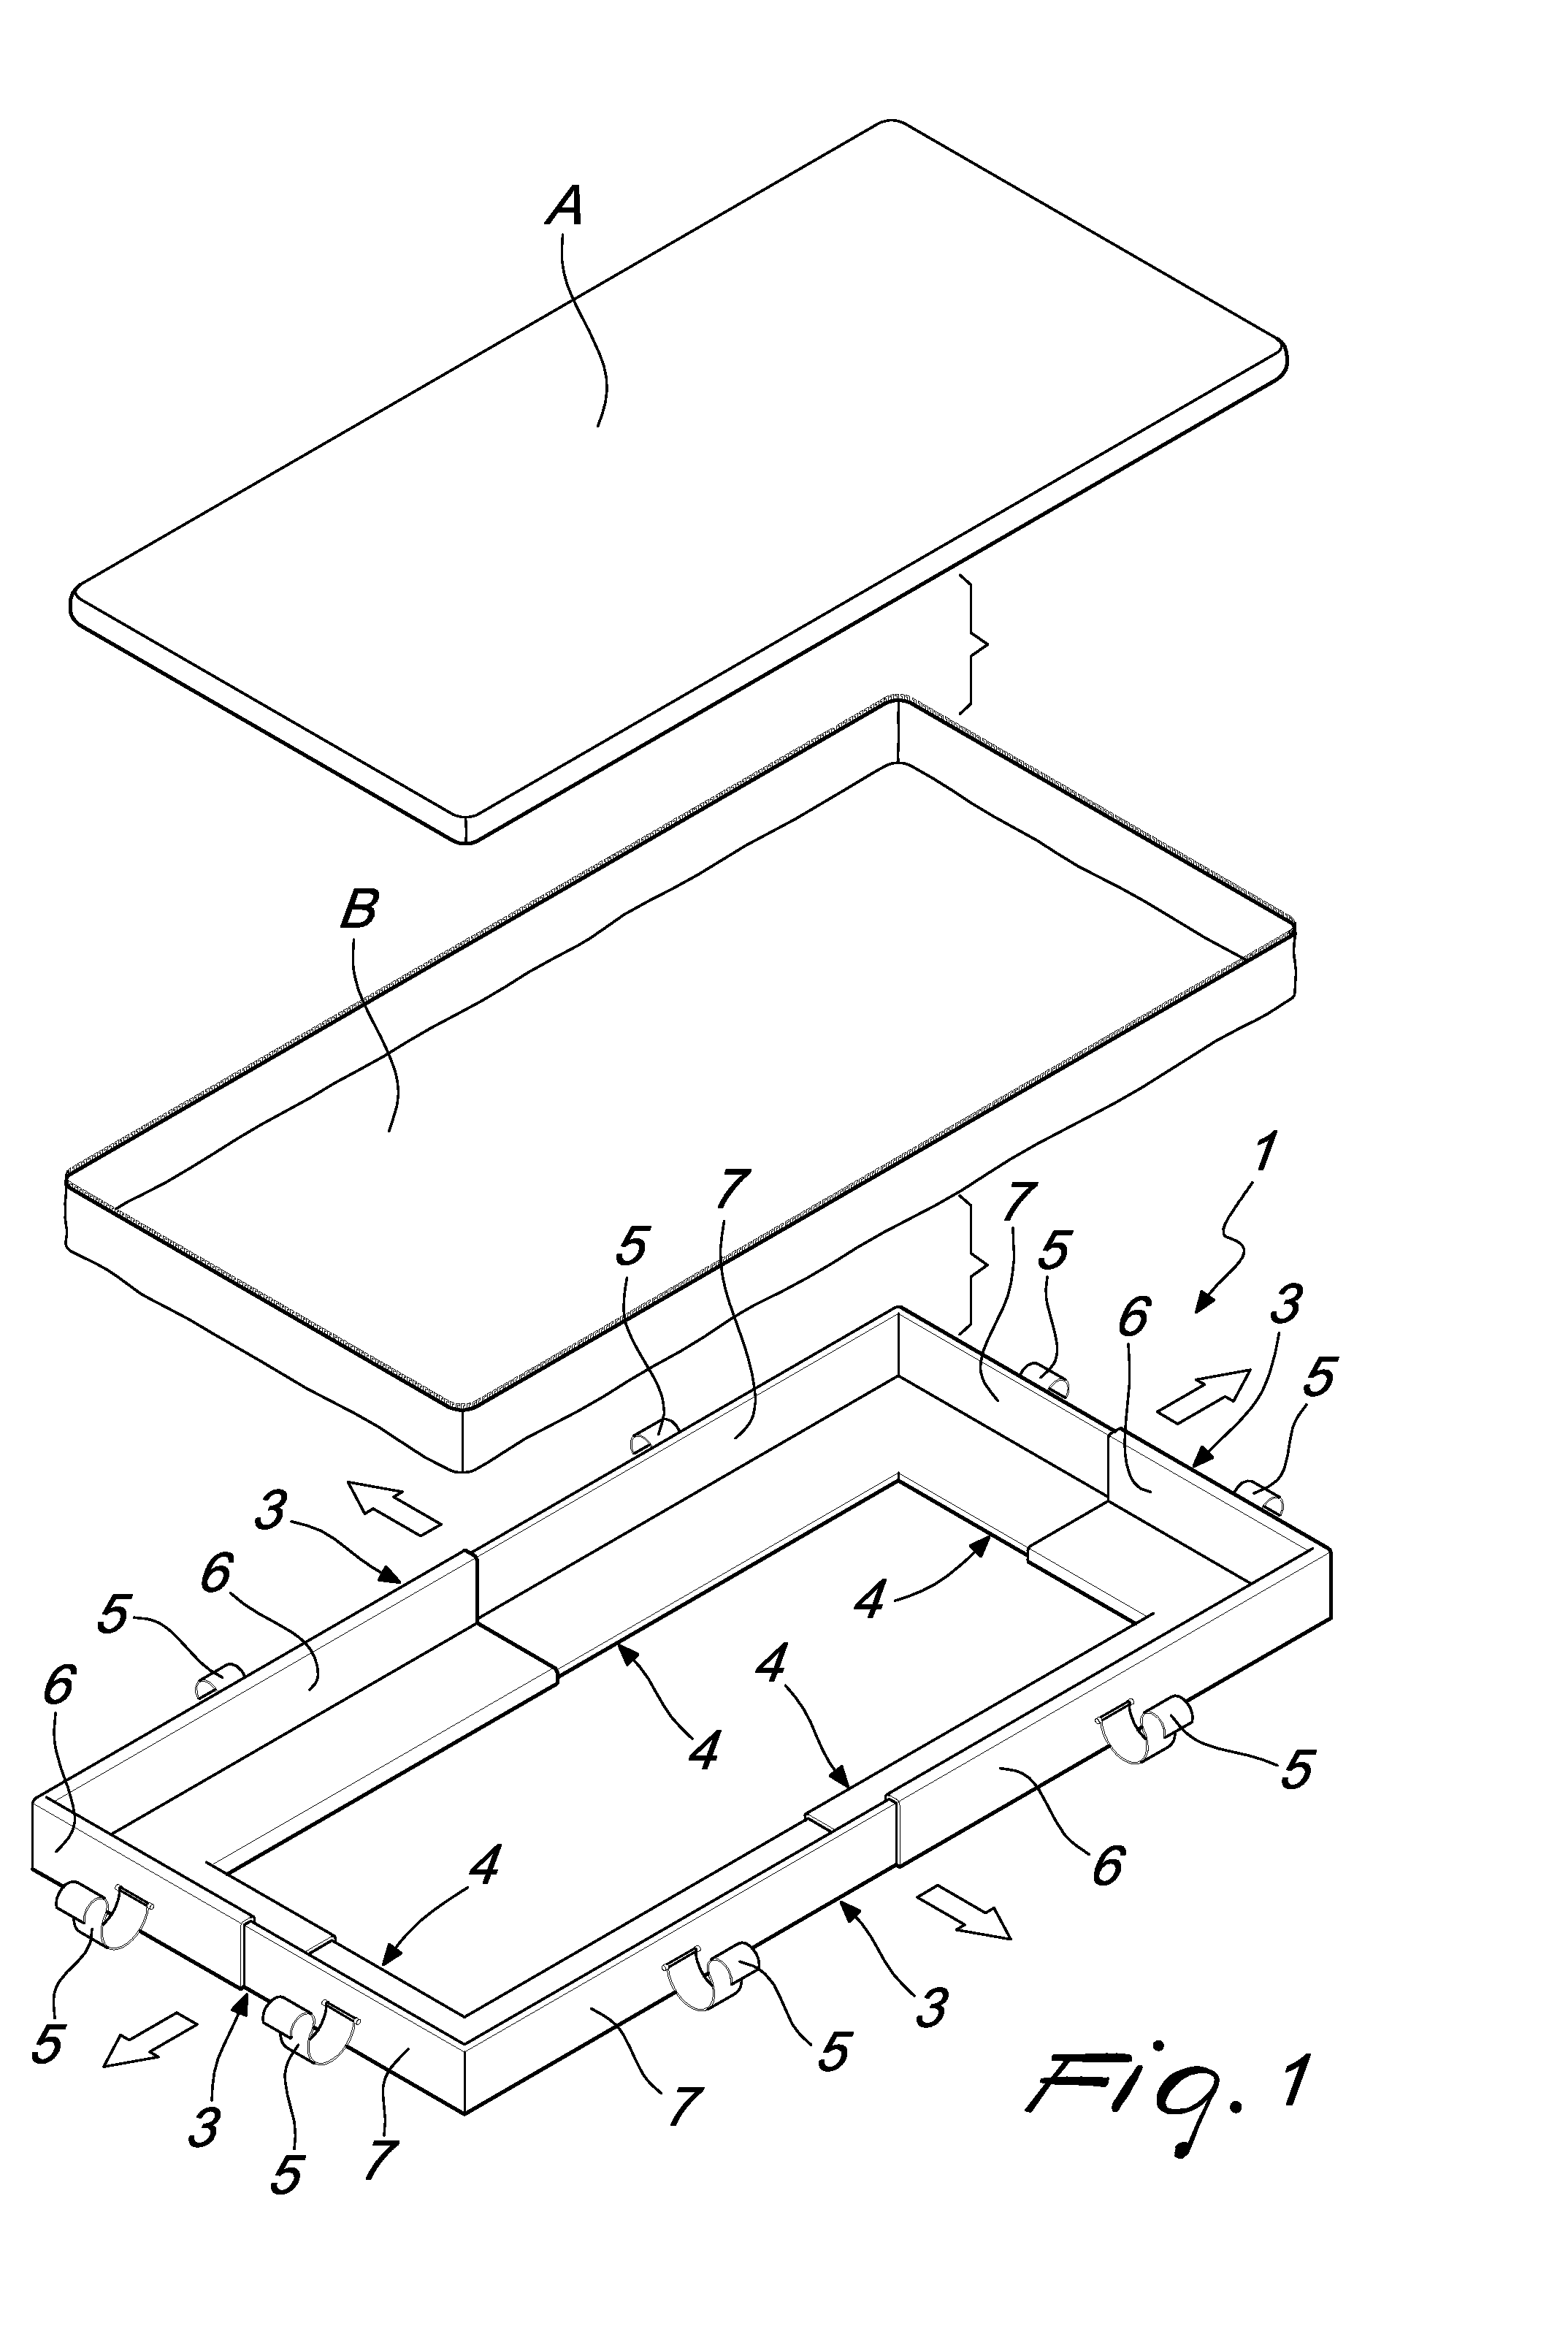 Frame for sewing upper pillows on covering shells for mattresses, machine for sewing upper pillows on covering shells for mattresses, and method of sewing upper pillows on covering shells for mattresses